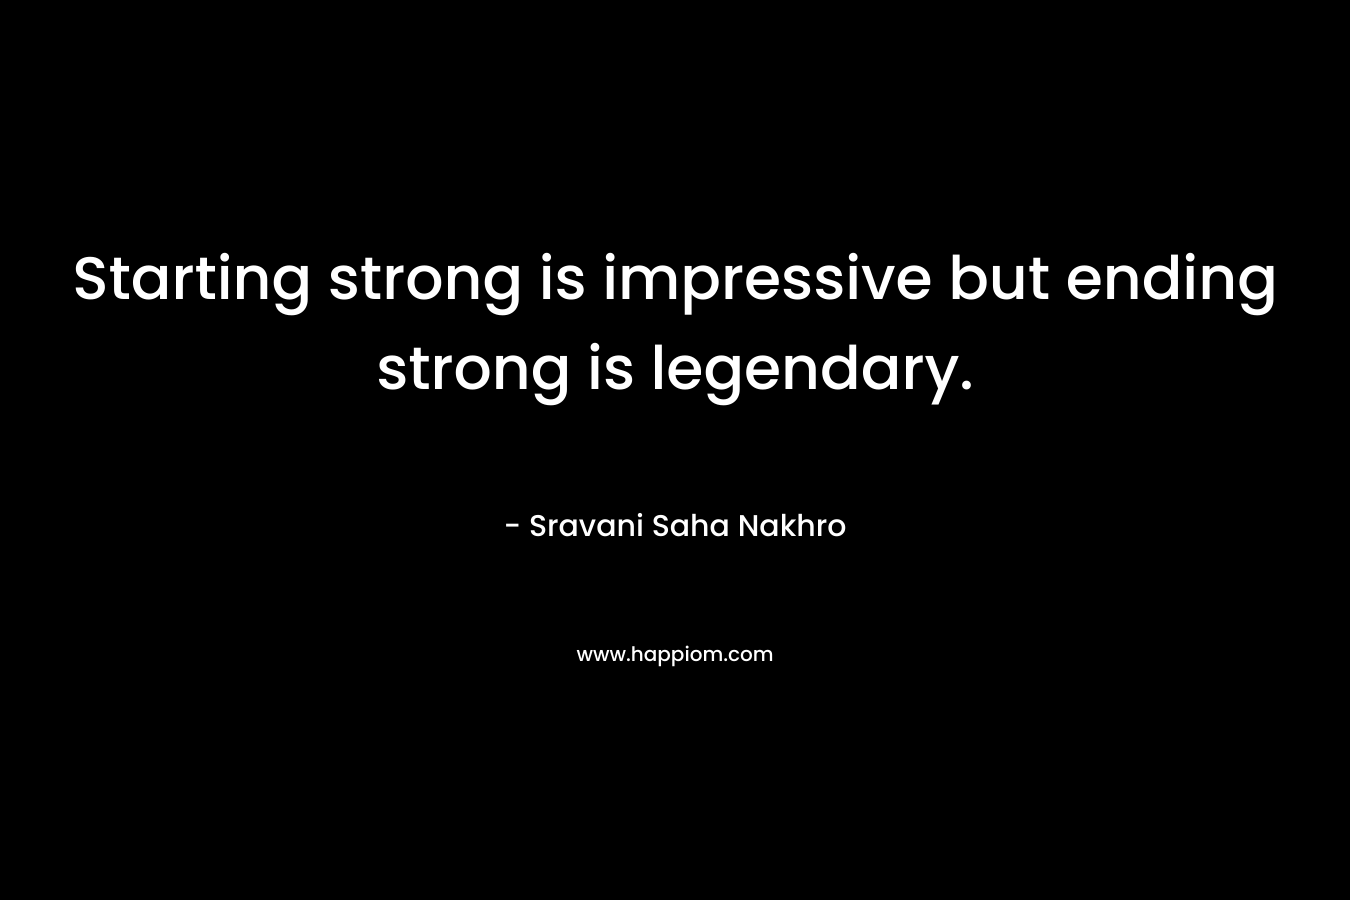 Starting strong is impressive but ending strong is legendary.